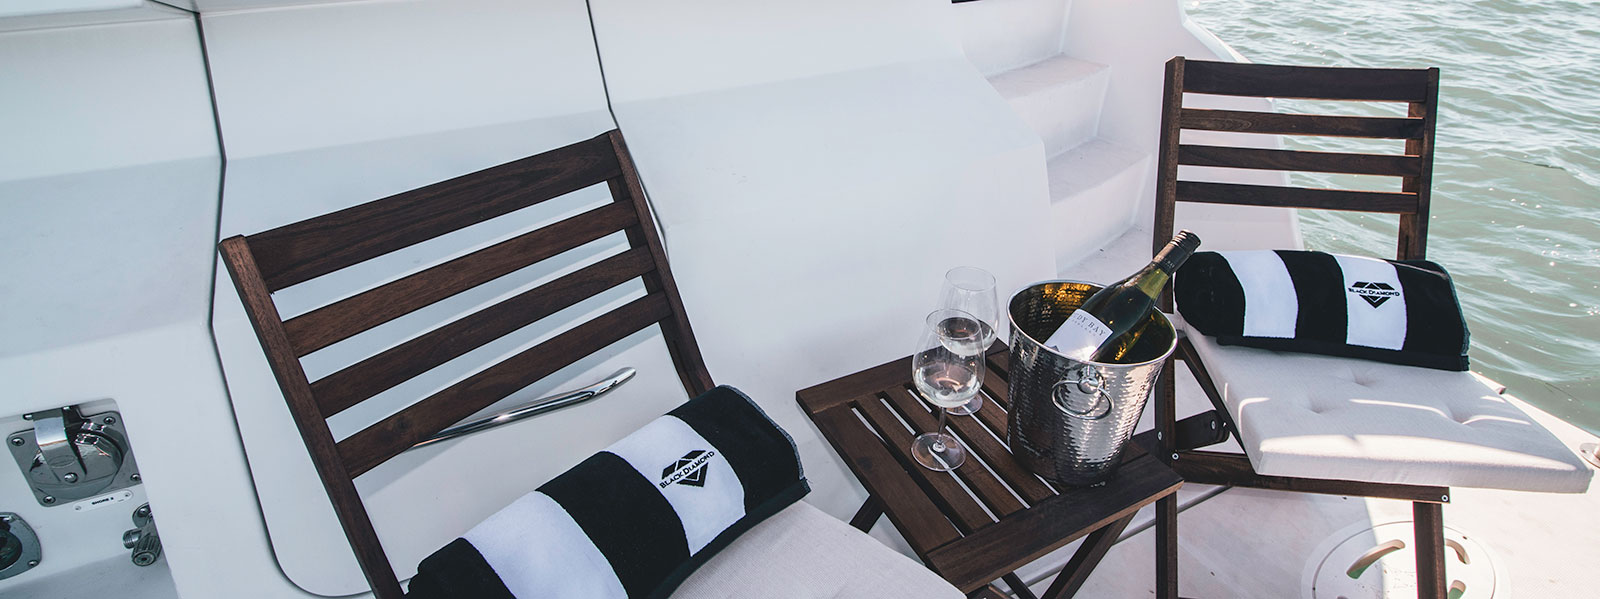 Casual chairs aboard yacht at stern